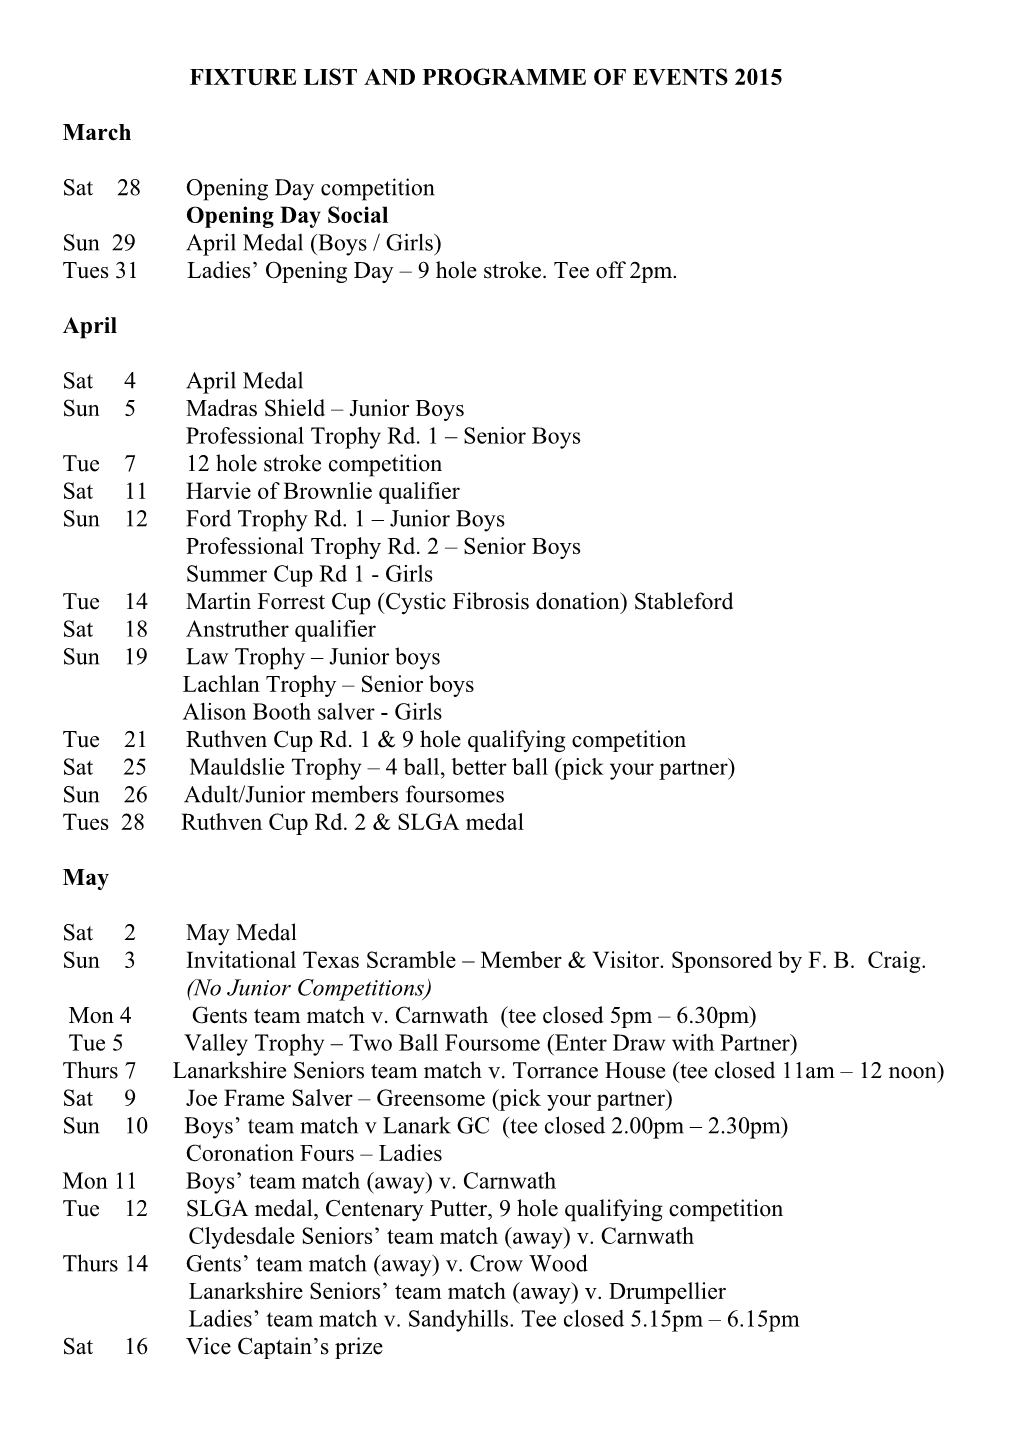 Fixture List and Programme of Events 2015